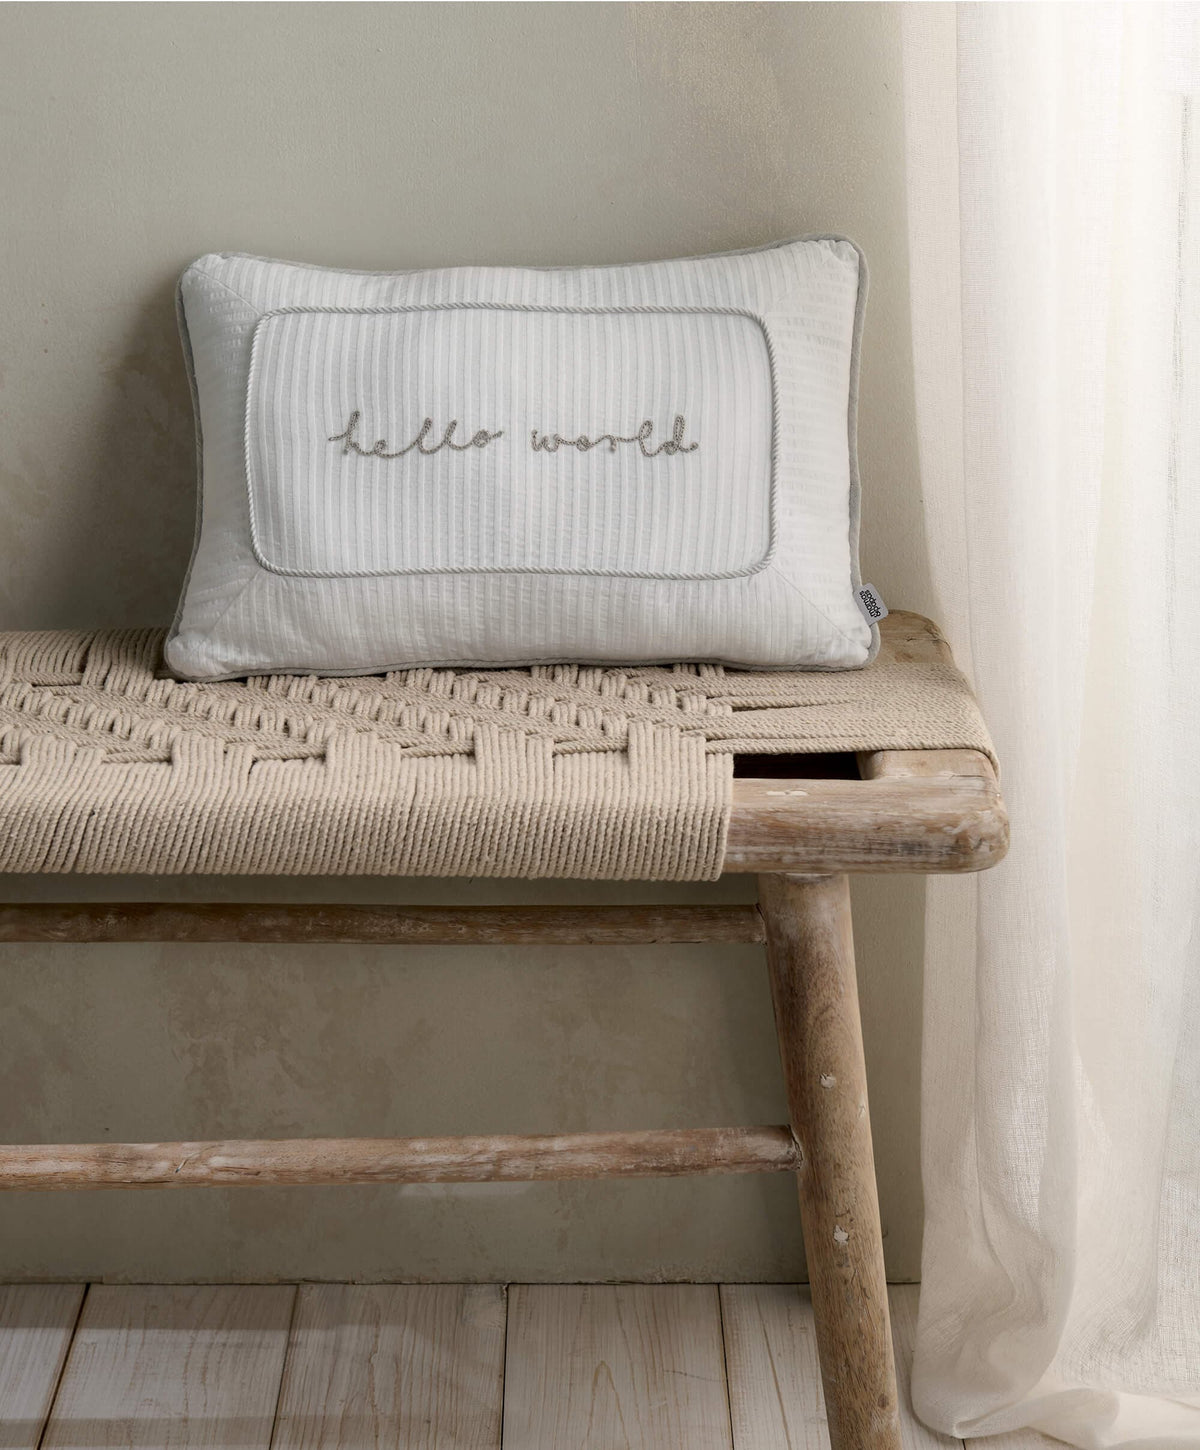 Welcome To The World Cushion - White